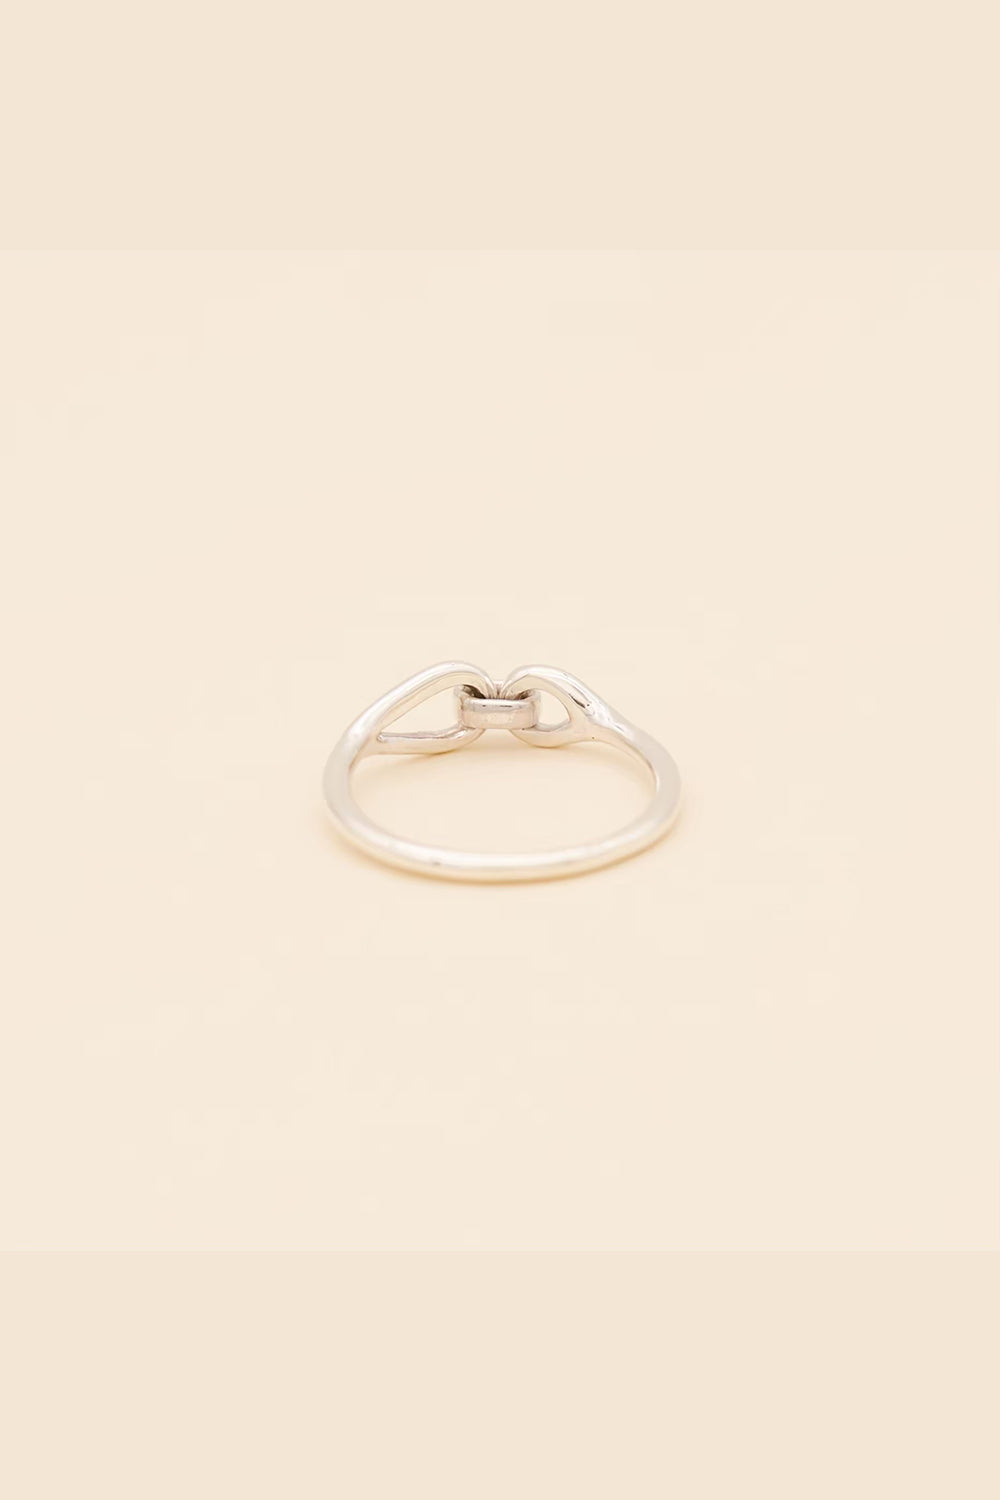 Sprout / SP-R29 / RING